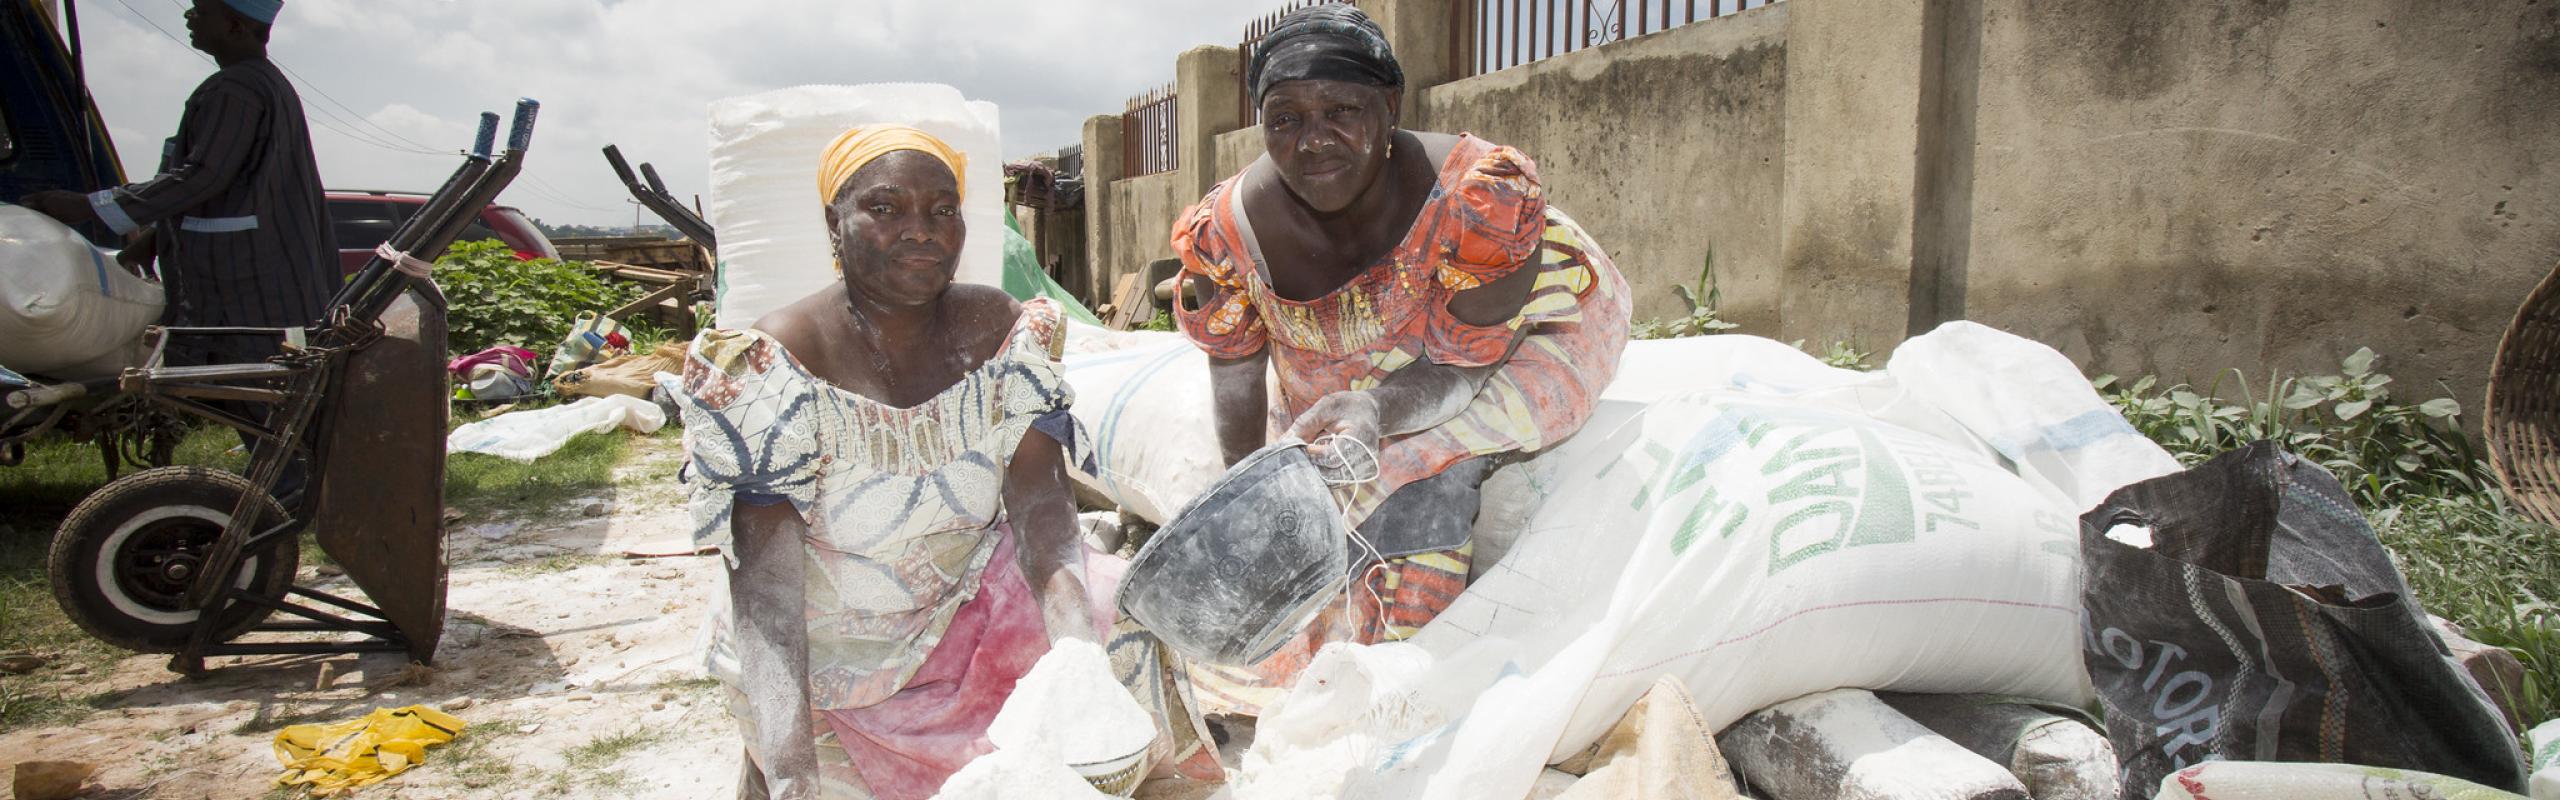 Two women crouch in open air market, sifting cassava flour out of sacks into large bowl